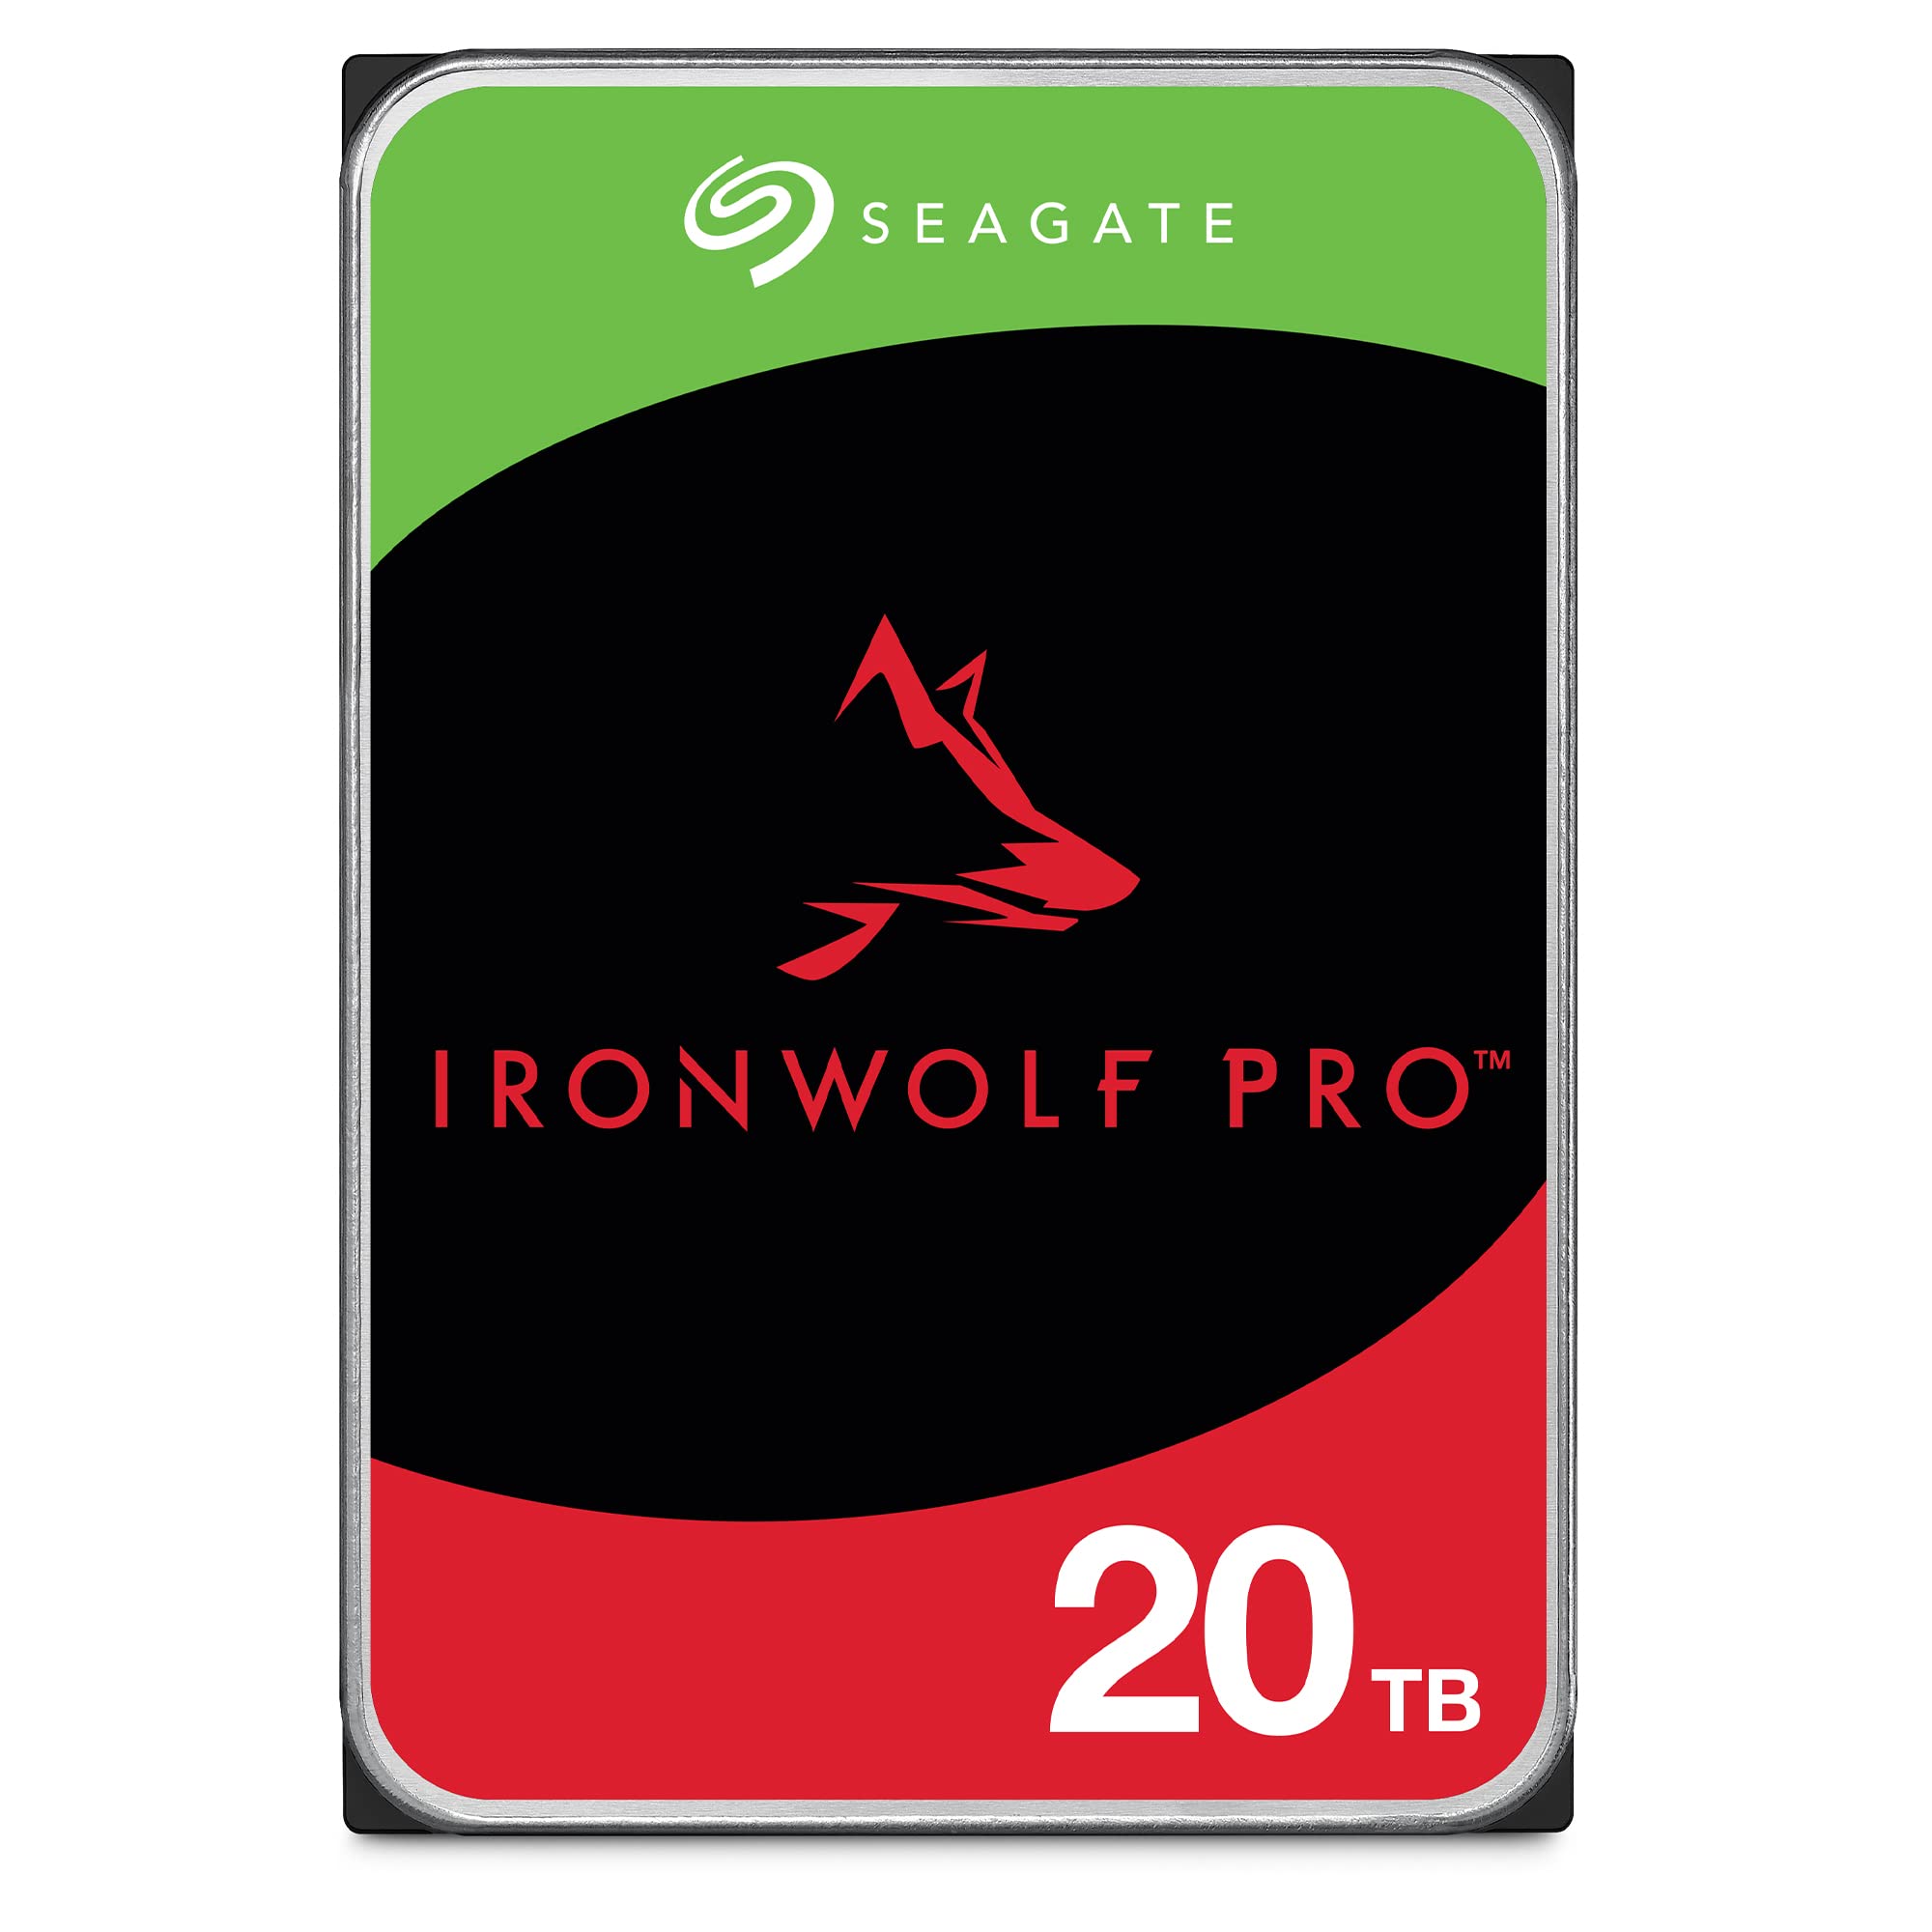 Seagate IronWolf Pro 20TB NAS Internal Hard Drive HDD – CMR 3.5 Inch SATA 6Gb/s 7200 RPM 256MB Cache for RAID Network Attached Storage, Rescue Services – Frustration Free Packaging(ST20000NEZ00)